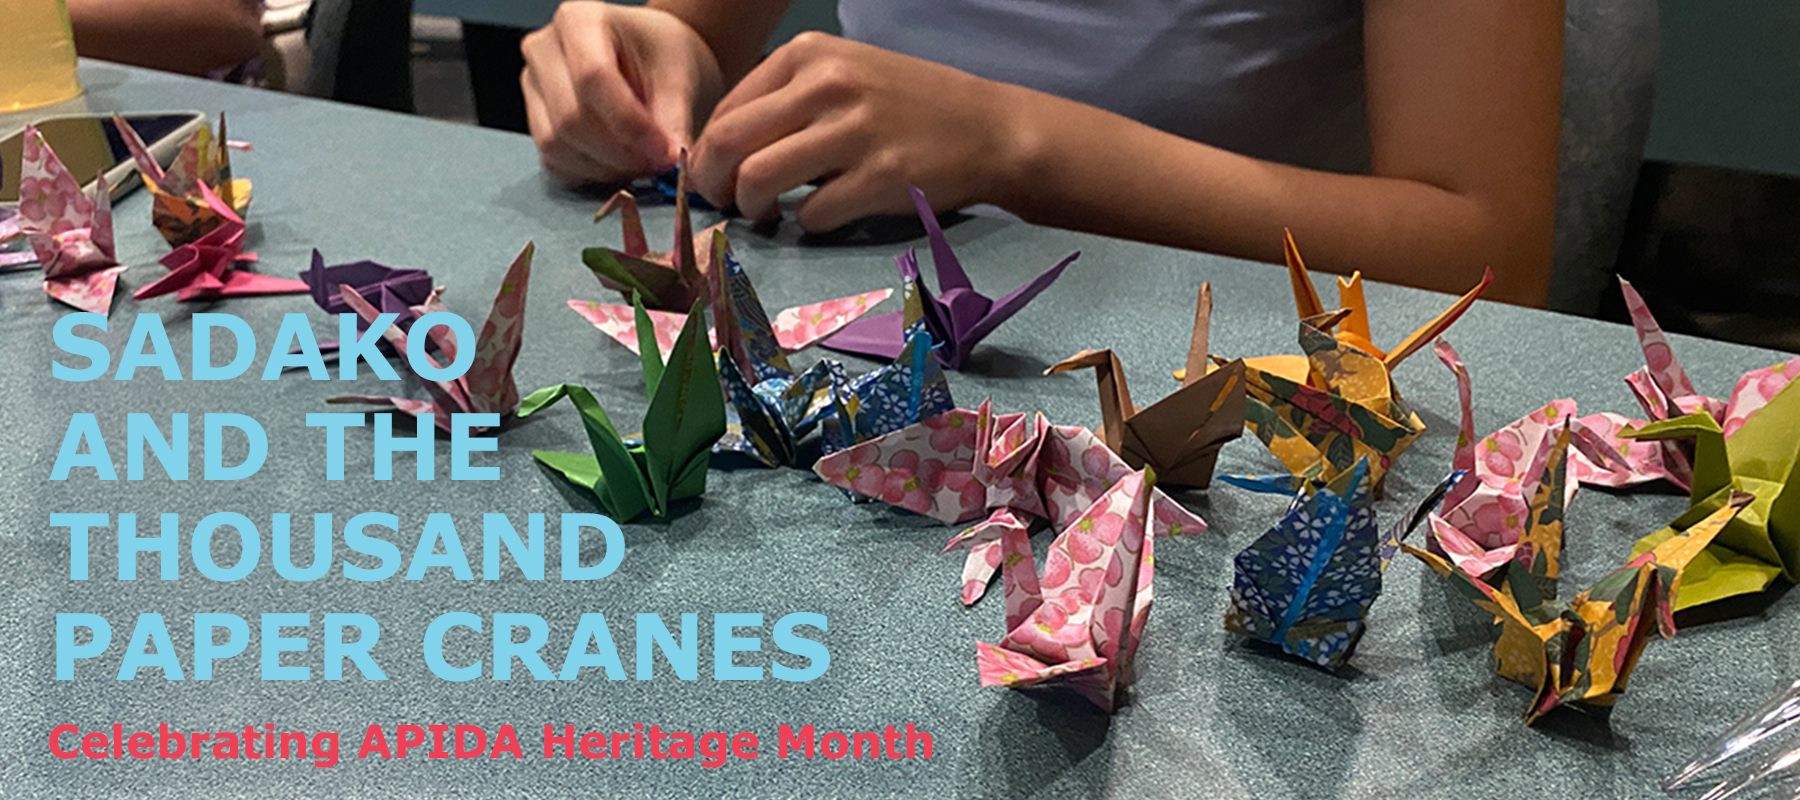 Person's hands are shown making origami paper cranes with 20 colorful cranes on table already constructed